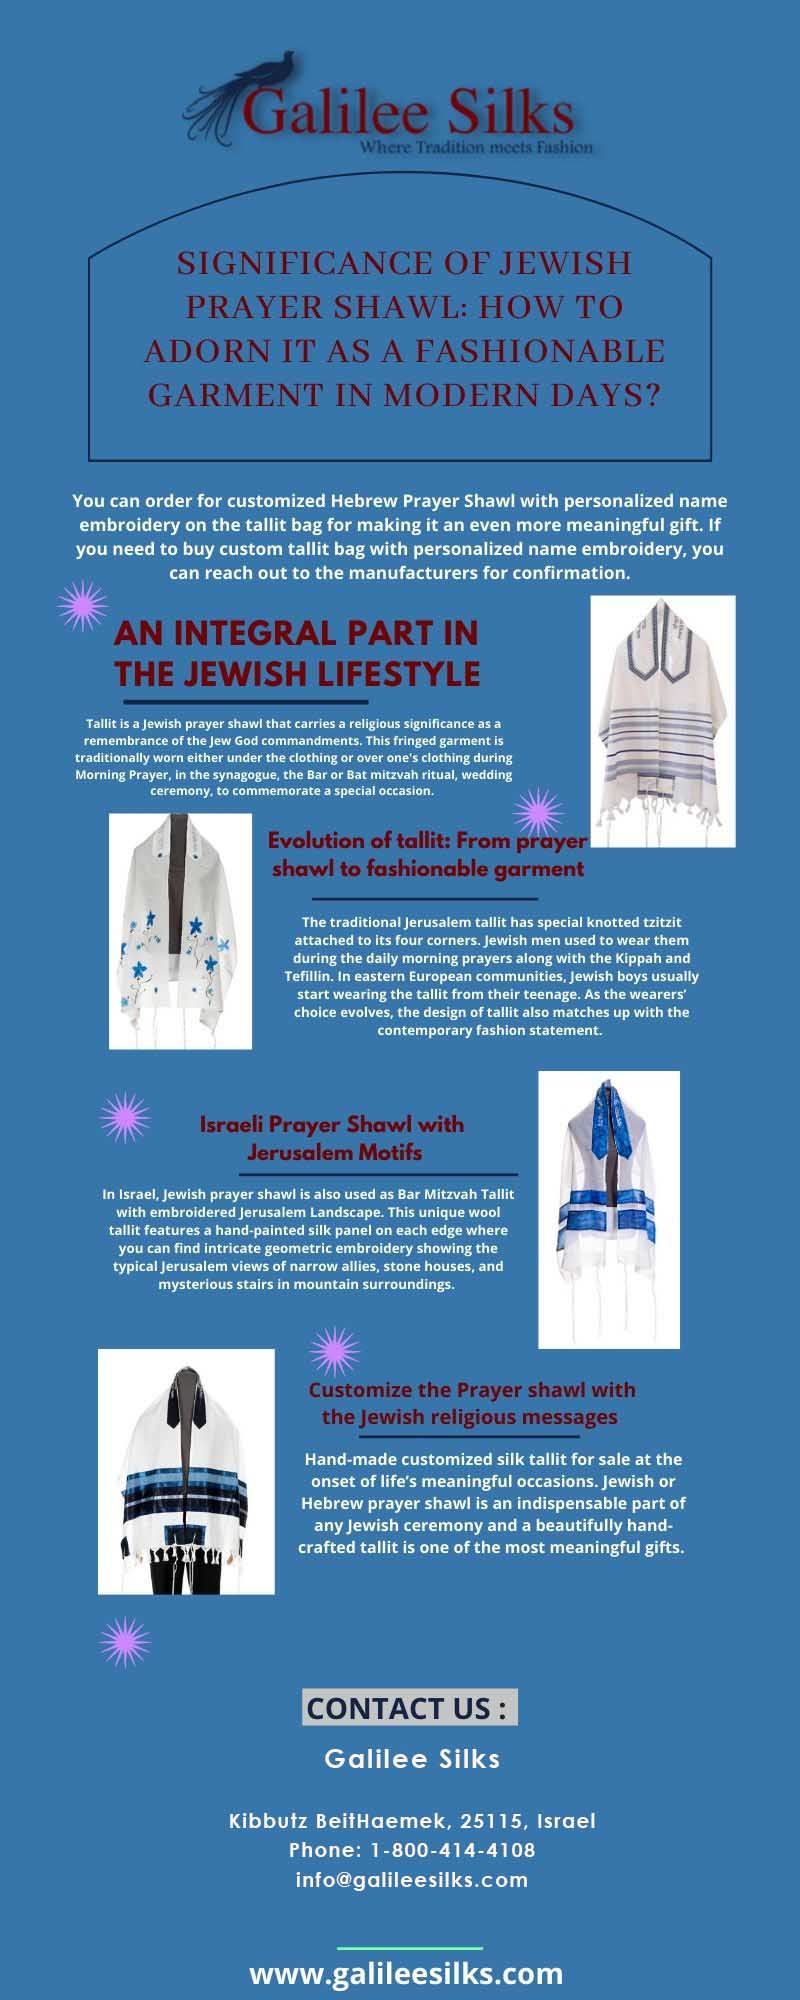 Significance of Jewish Prayer Shawl: How to adorn it as a fashionable garment in modern days? Adorn hand-painted Jewish prayer shawl from a reliable tallit store to follow the Jewish culture. Visit Galilee Silks for the best quality religious tallit. For more details, visit: https://www.galileesilks.com/collections/womens-tallit-1
 by amramrafi